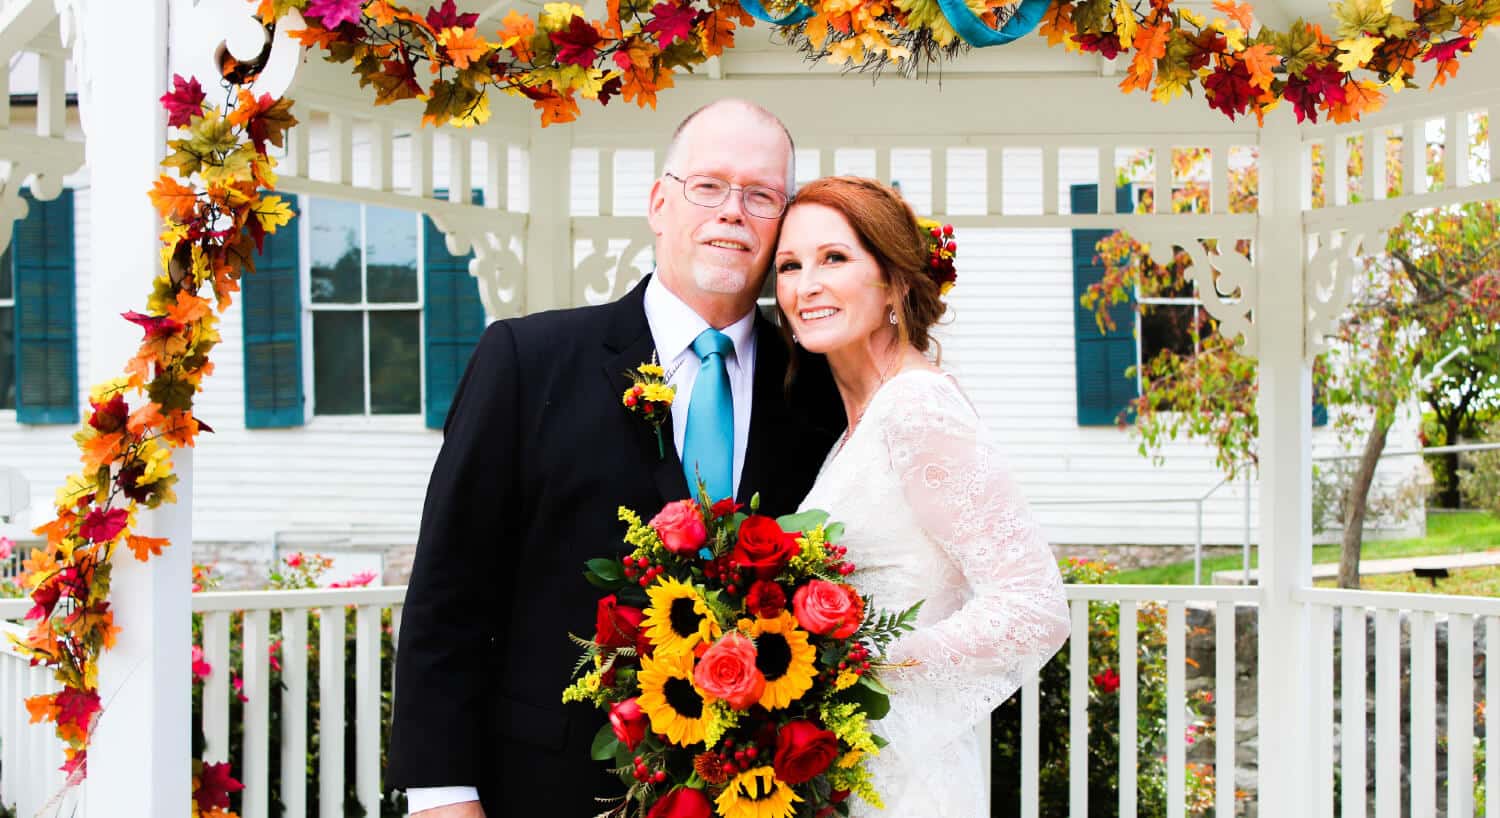 bride holding bouquet with fall flowers and groom standing by white gazebo  with draping fall flowers house with green shutters in distance